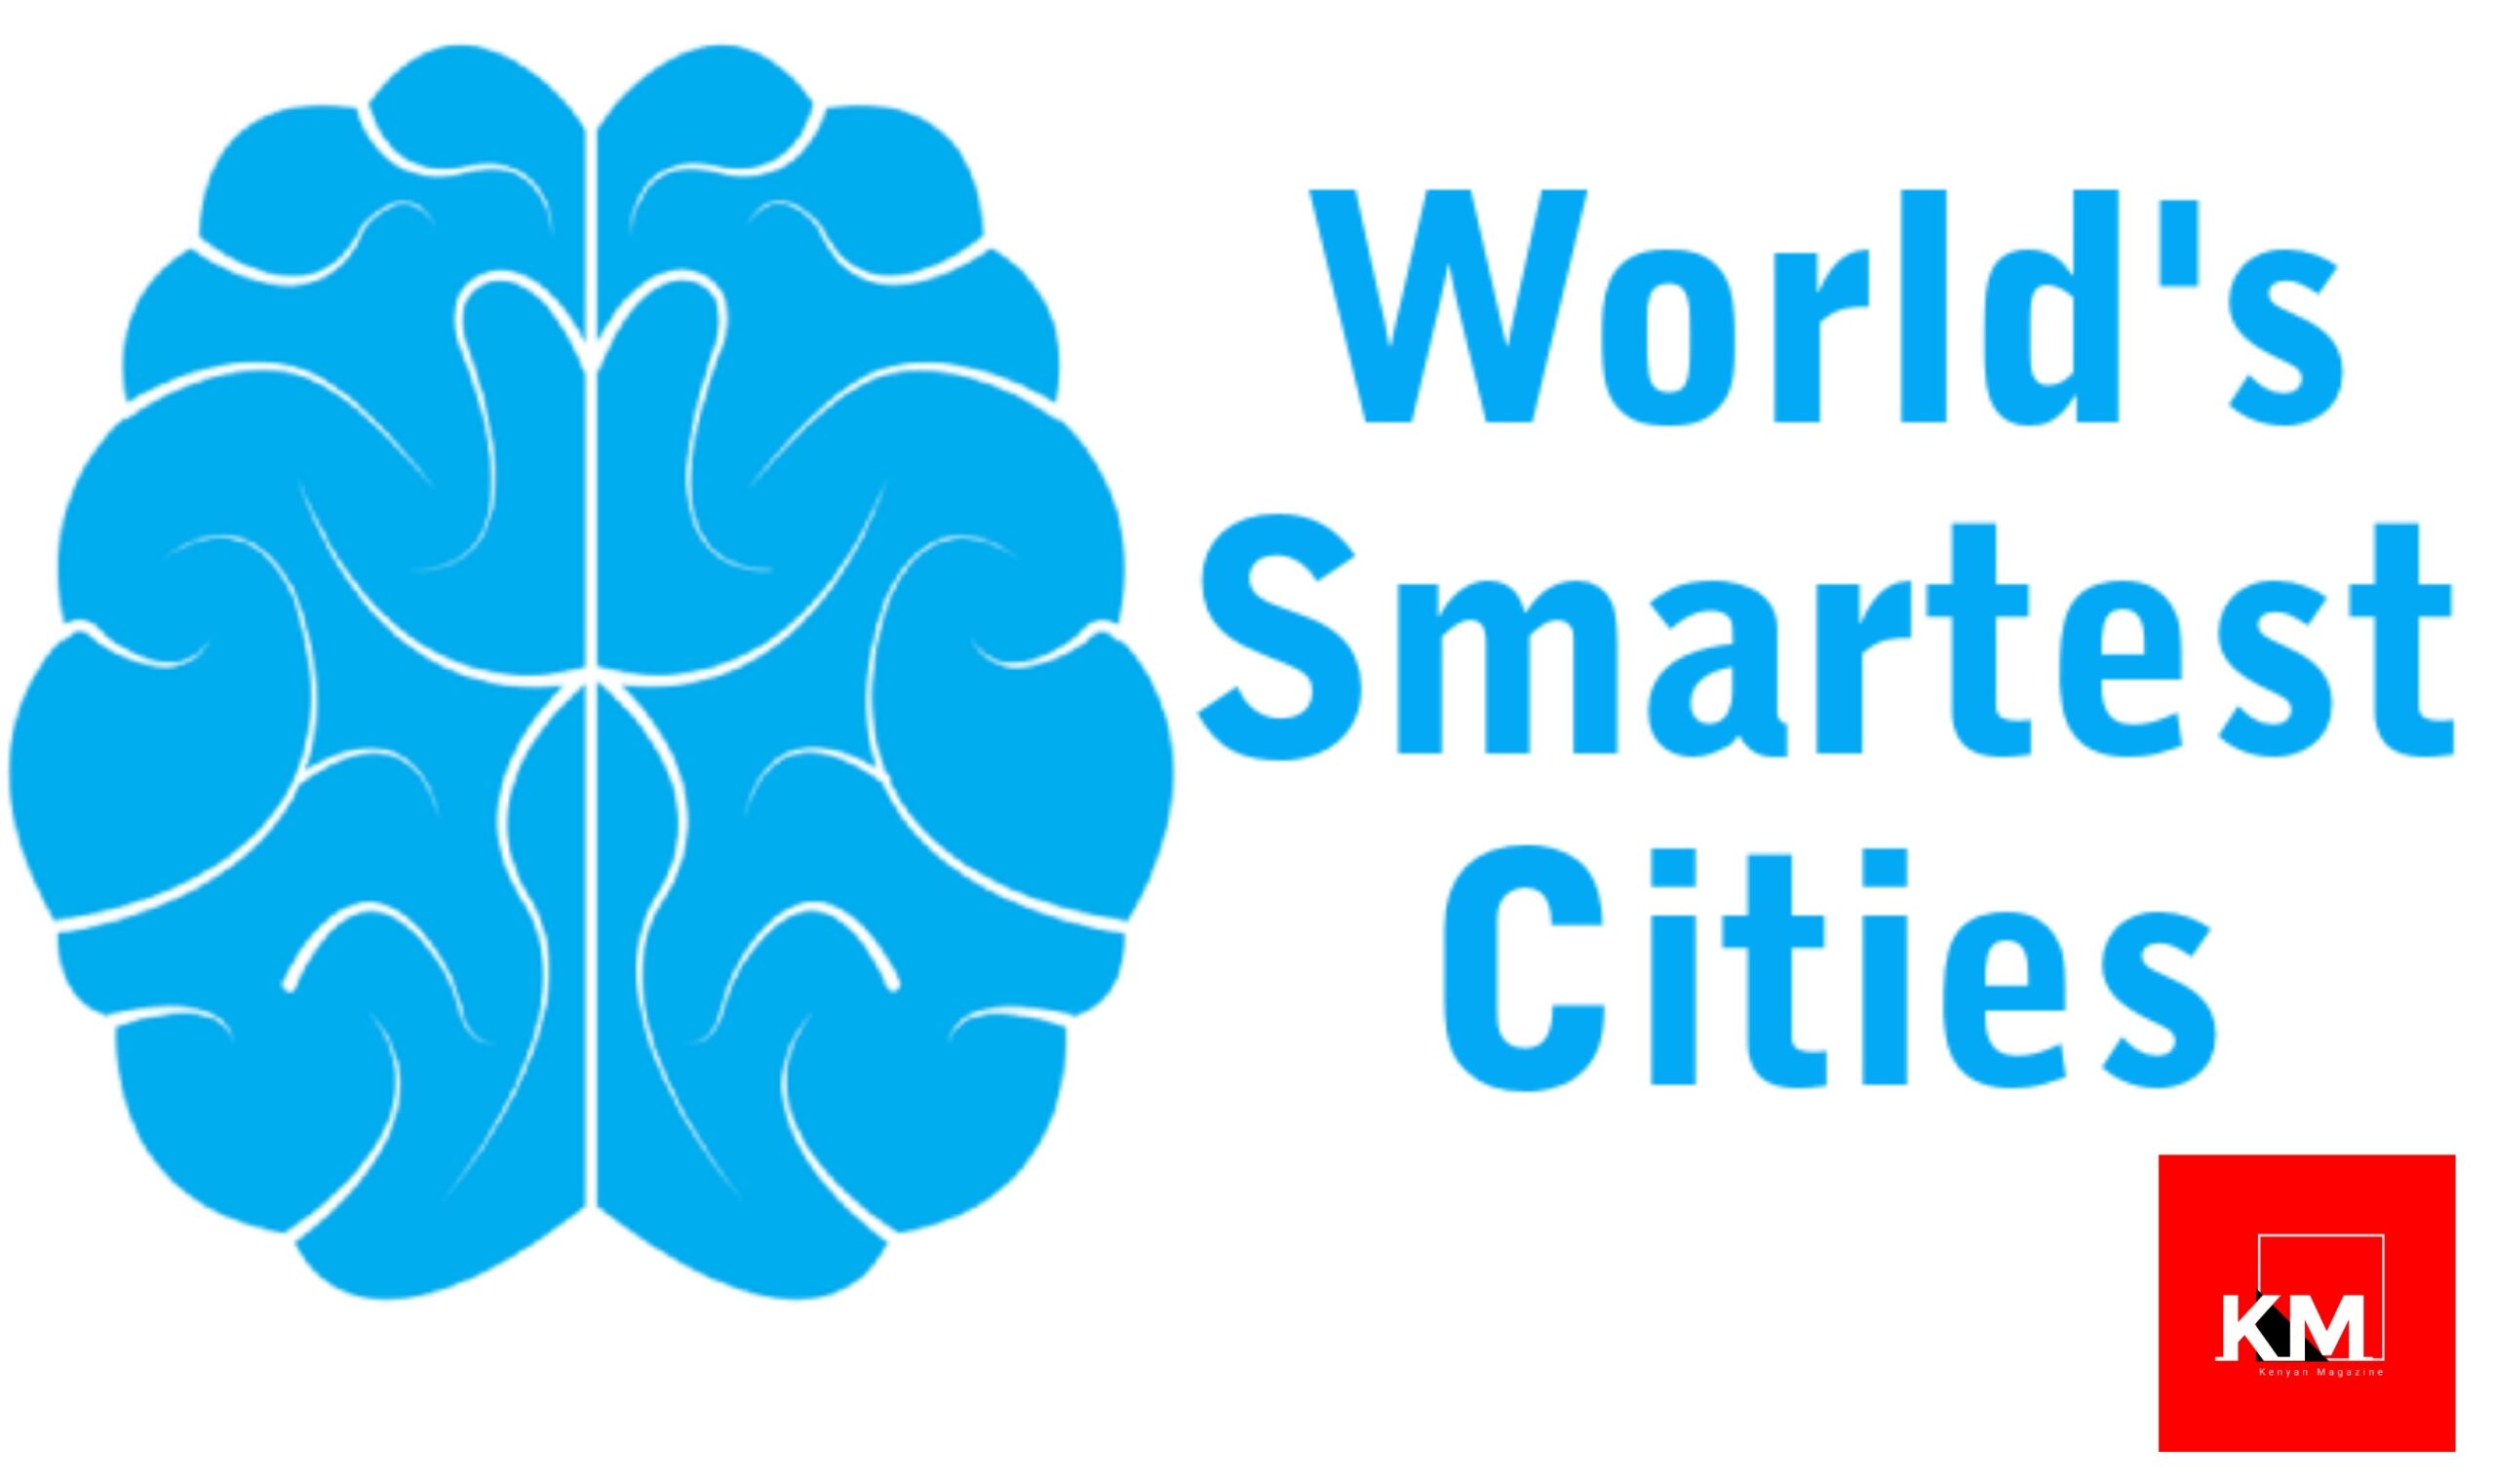 Smartest Cities In the world